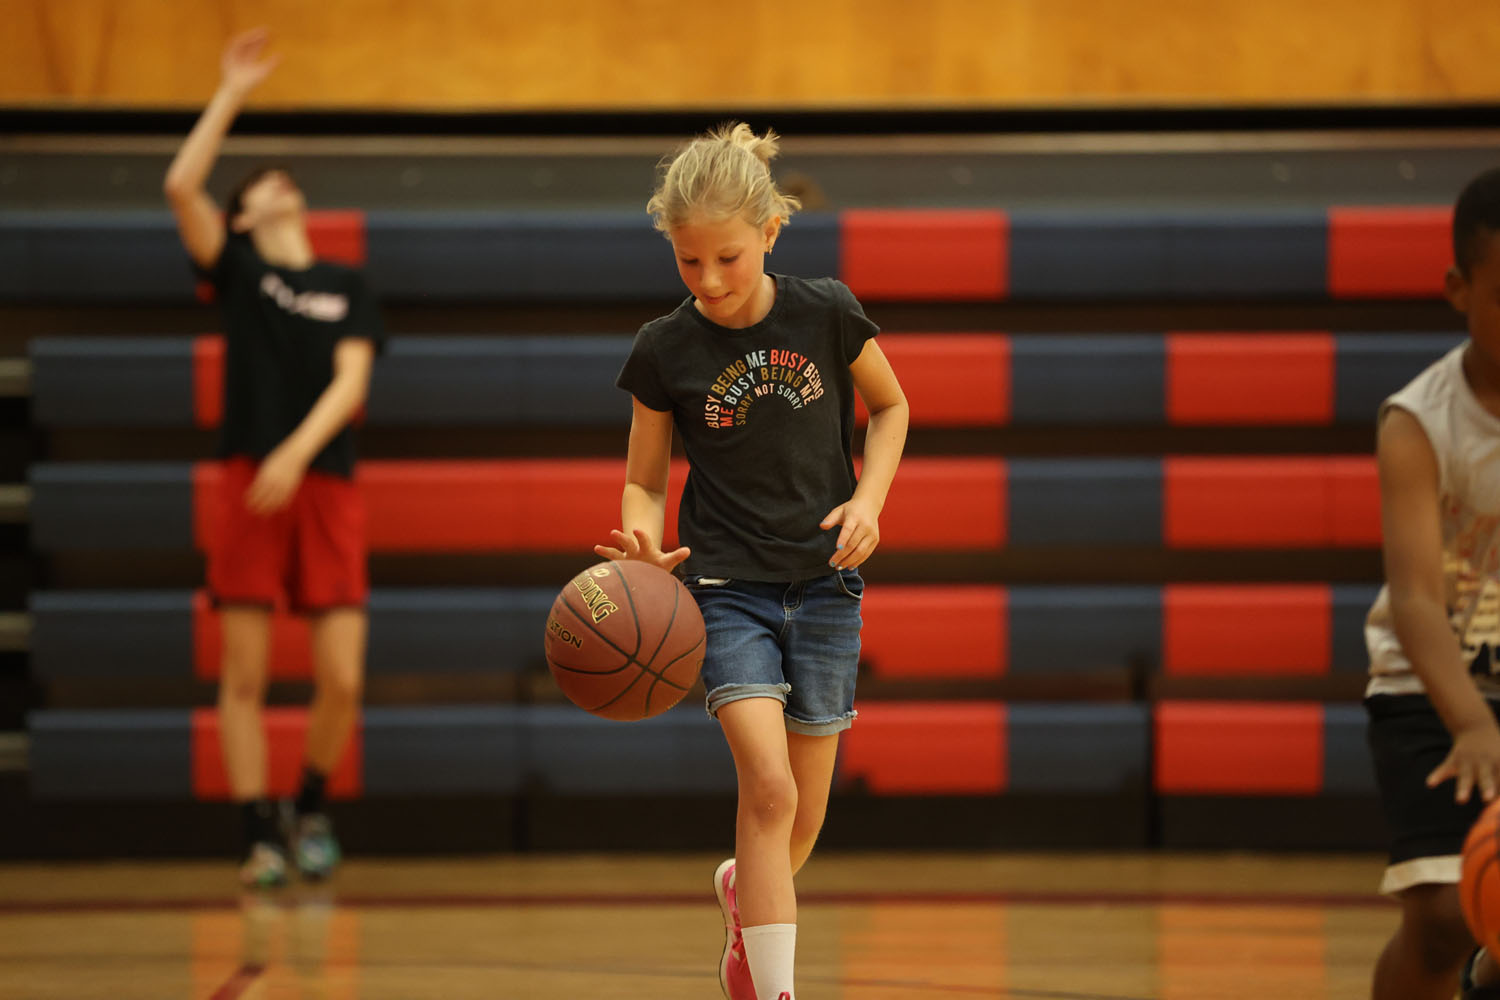 Young camper dribbling down the court